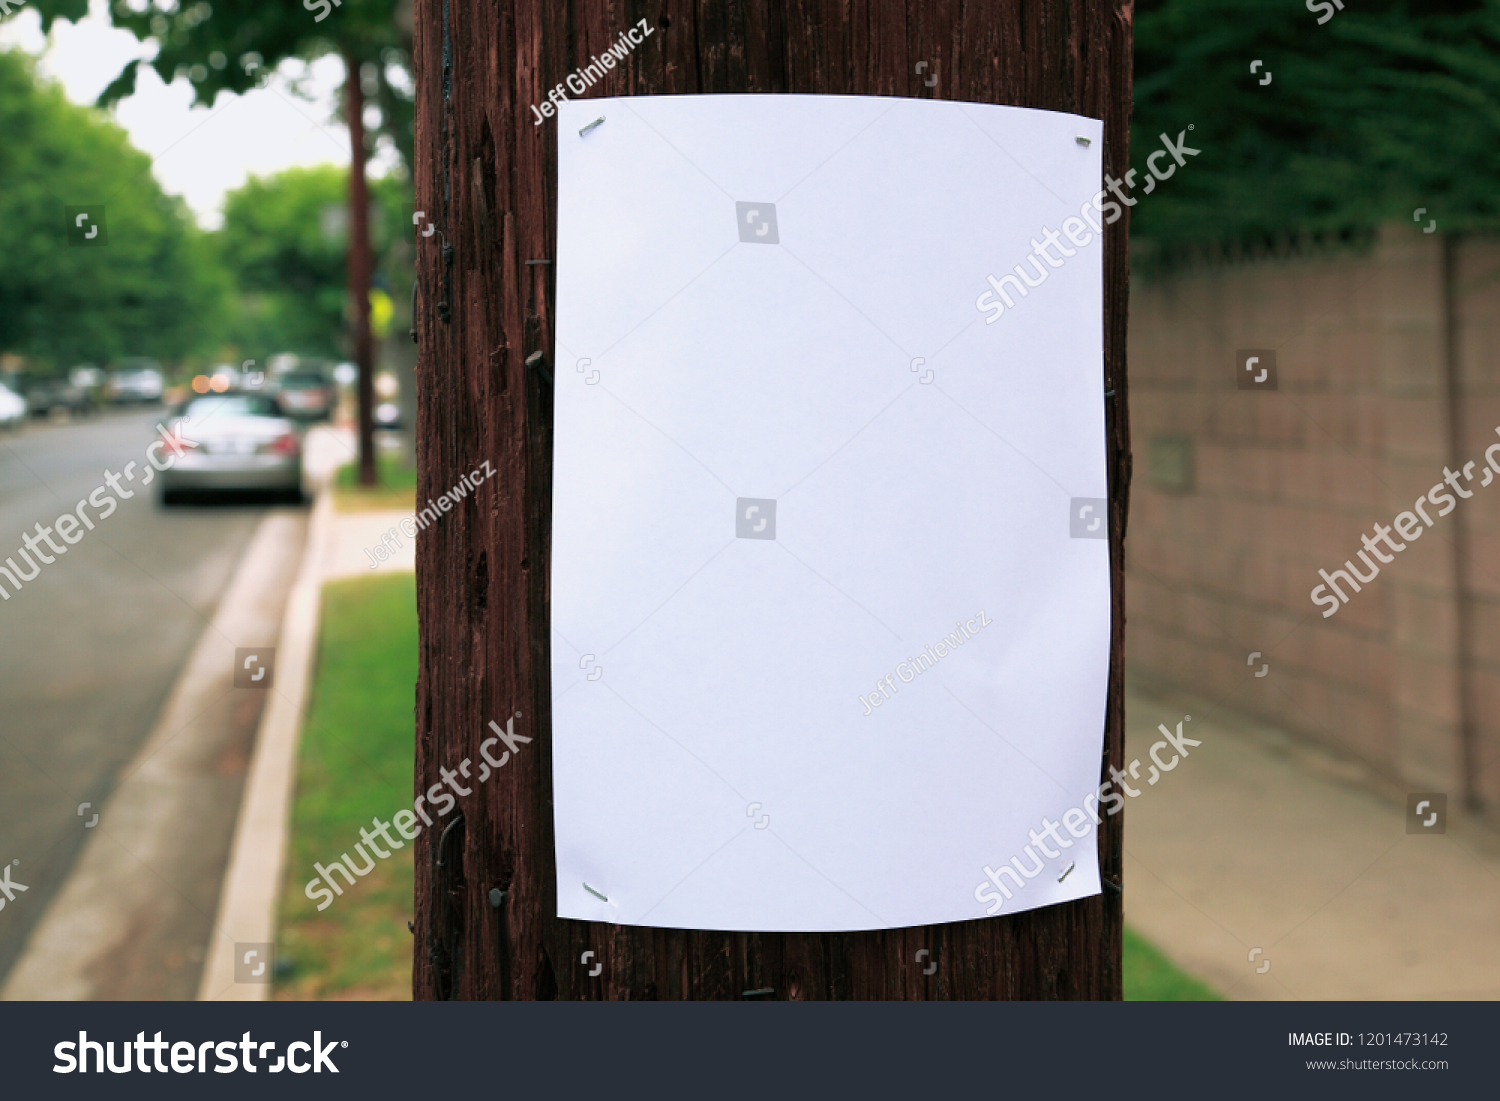 Blank sign stapled to a telephone pole #1201473142